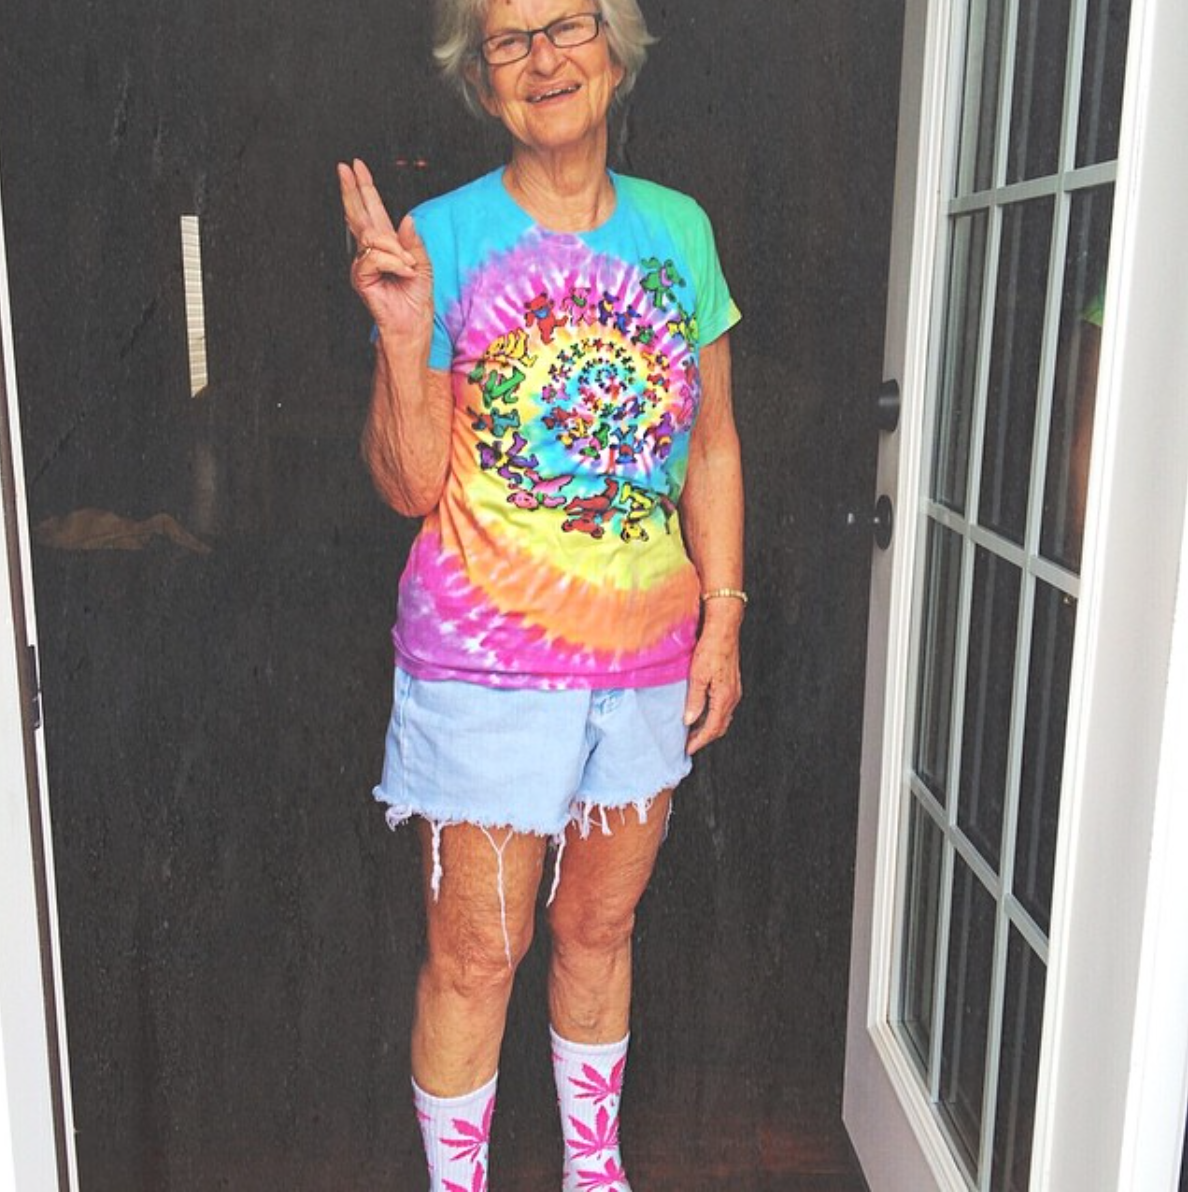 Baddie Winkle: Stealing Your Man Since 1928 and Winning ... - 1188 x 1192 png 1408kB